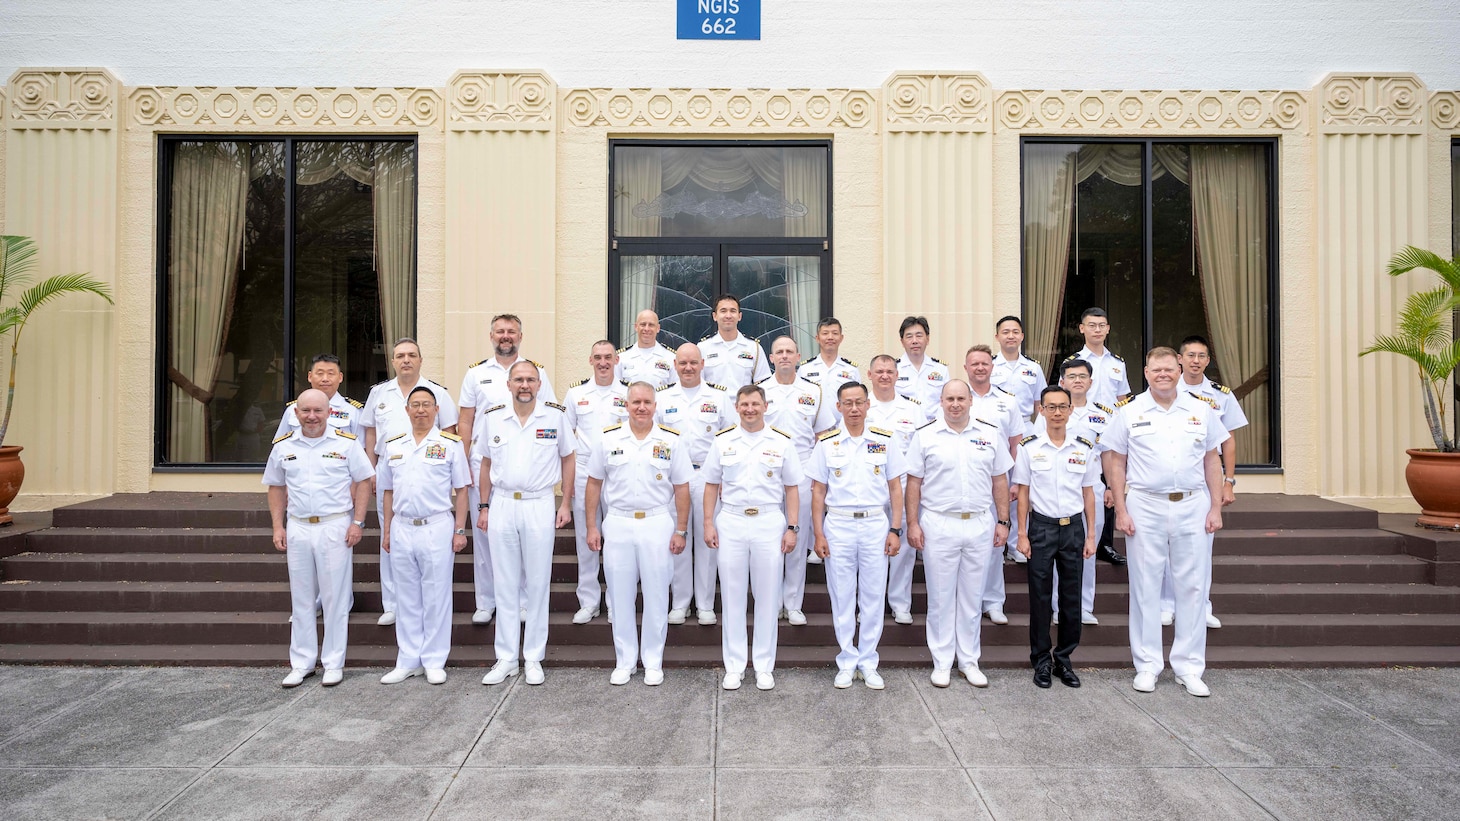 JOINT BASE PEARL HARBOR-HICKAM (April 11, 2024) — Attendees of the Undersea Warfare Commanders’ Conference (USWCC) pose for a group photo on Joint Base Pearl Harbor-Hickam, Hawaii, April 11, 2024. First held in 2018, this year’s theme was “Leveraging technology to integrate partners and improve communications, lethality and interchangeability.” (U.S. Navy photo by Mass Communication Specialist 1st Class Scott Barnes)